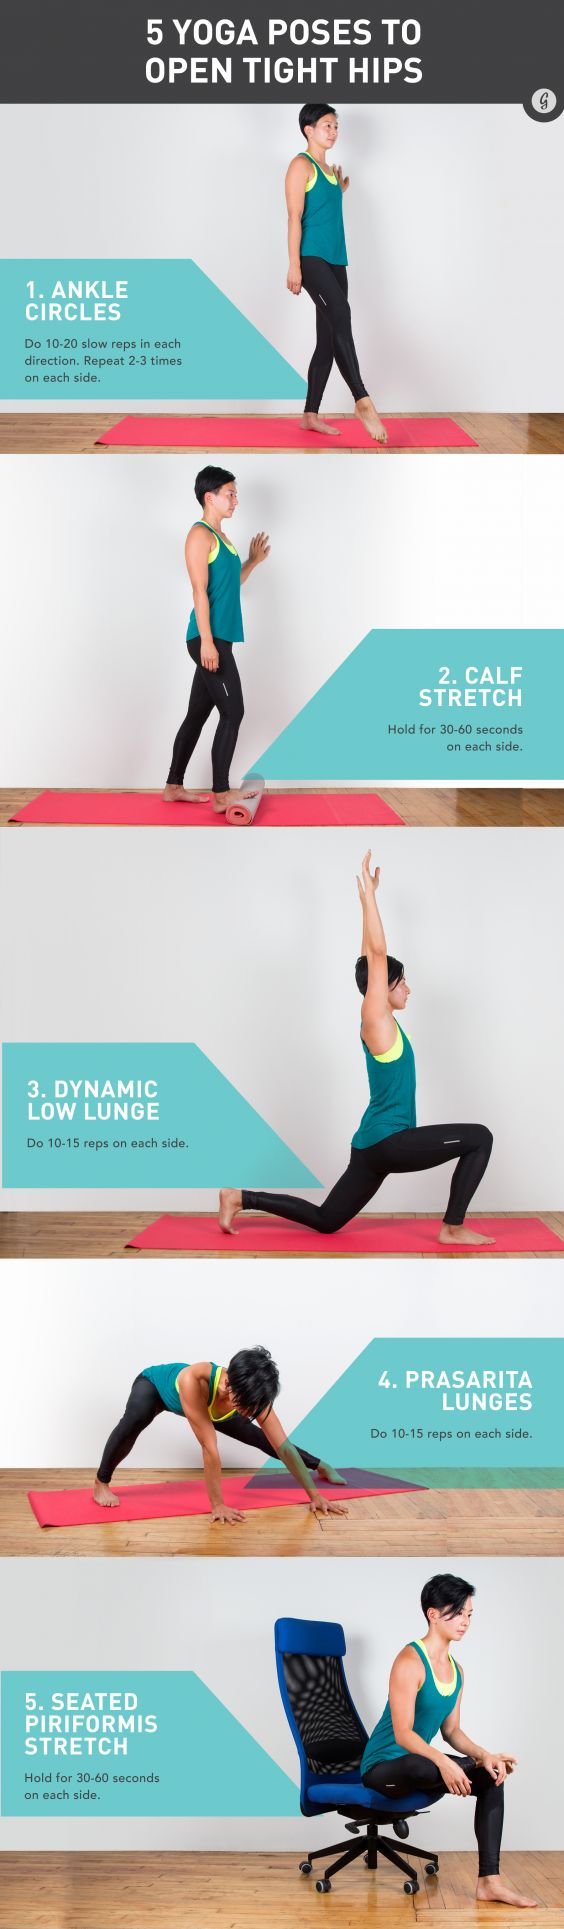 Yoga Poses for Healthy Hips